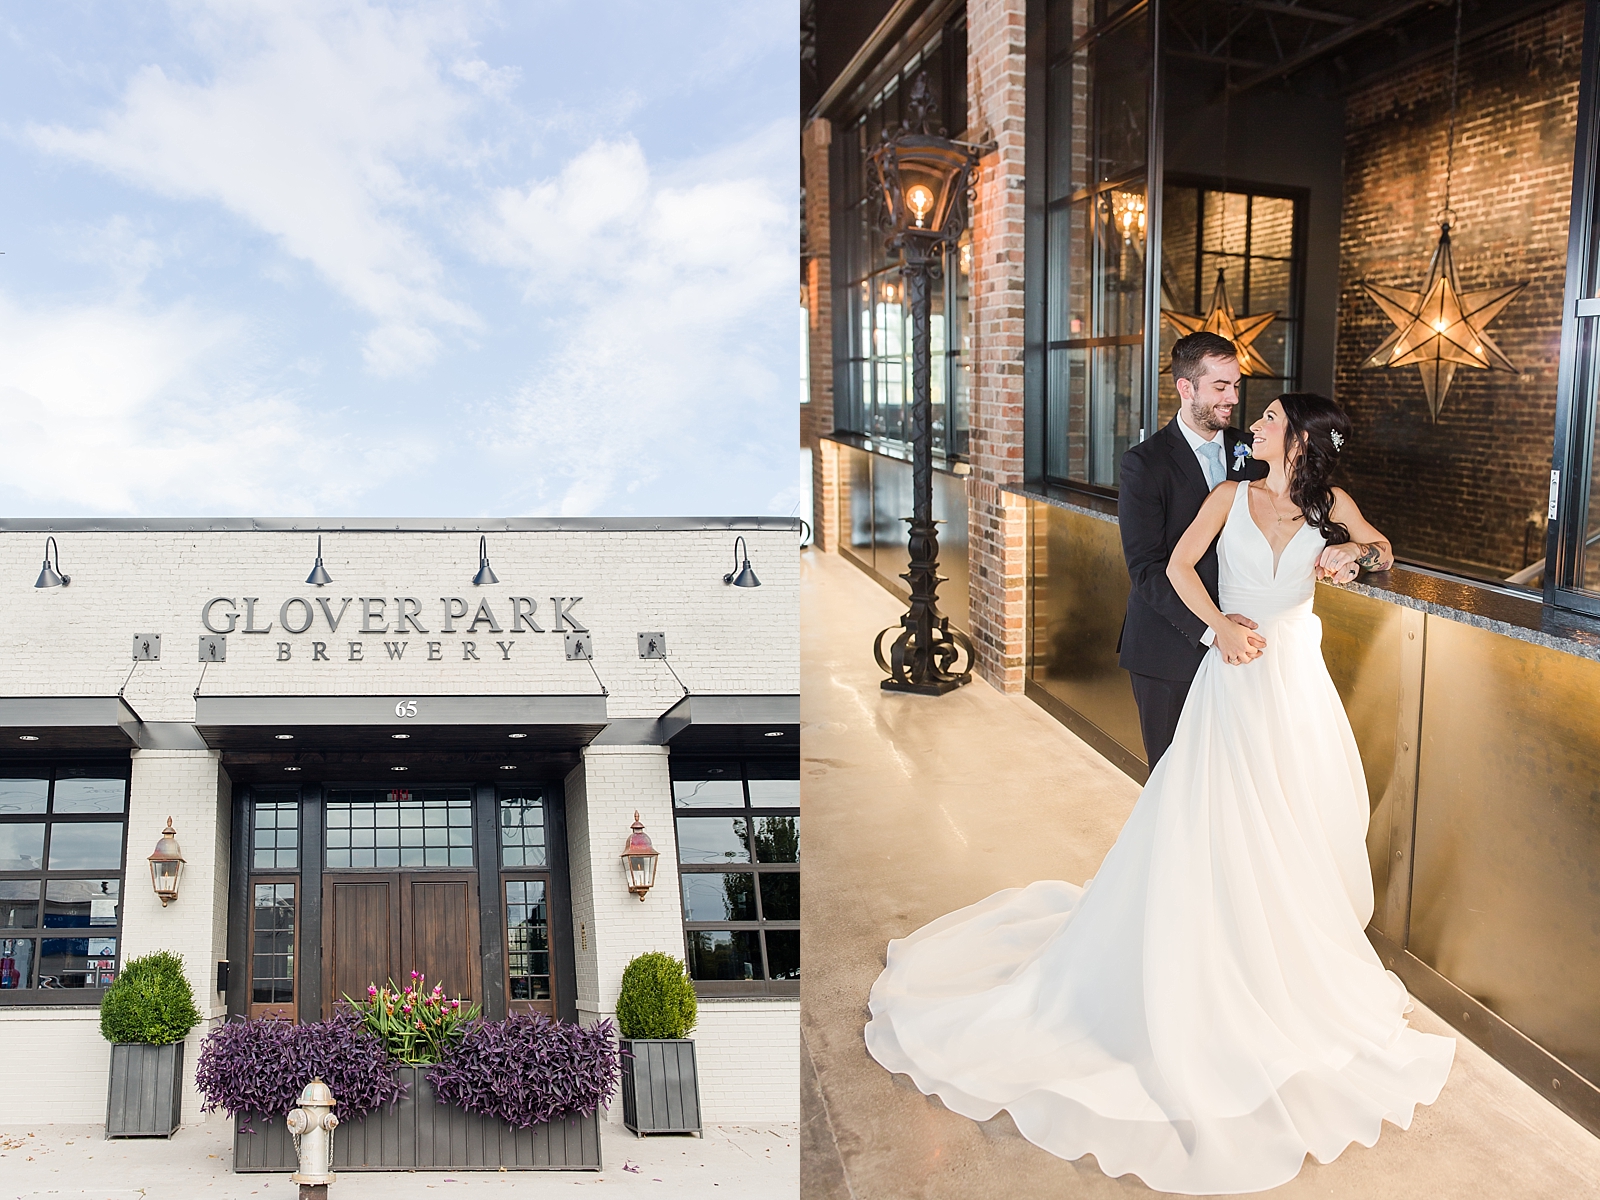 Glover Park Brewery Wedding front of venue and bride and groom in venue in front of star lights Photos